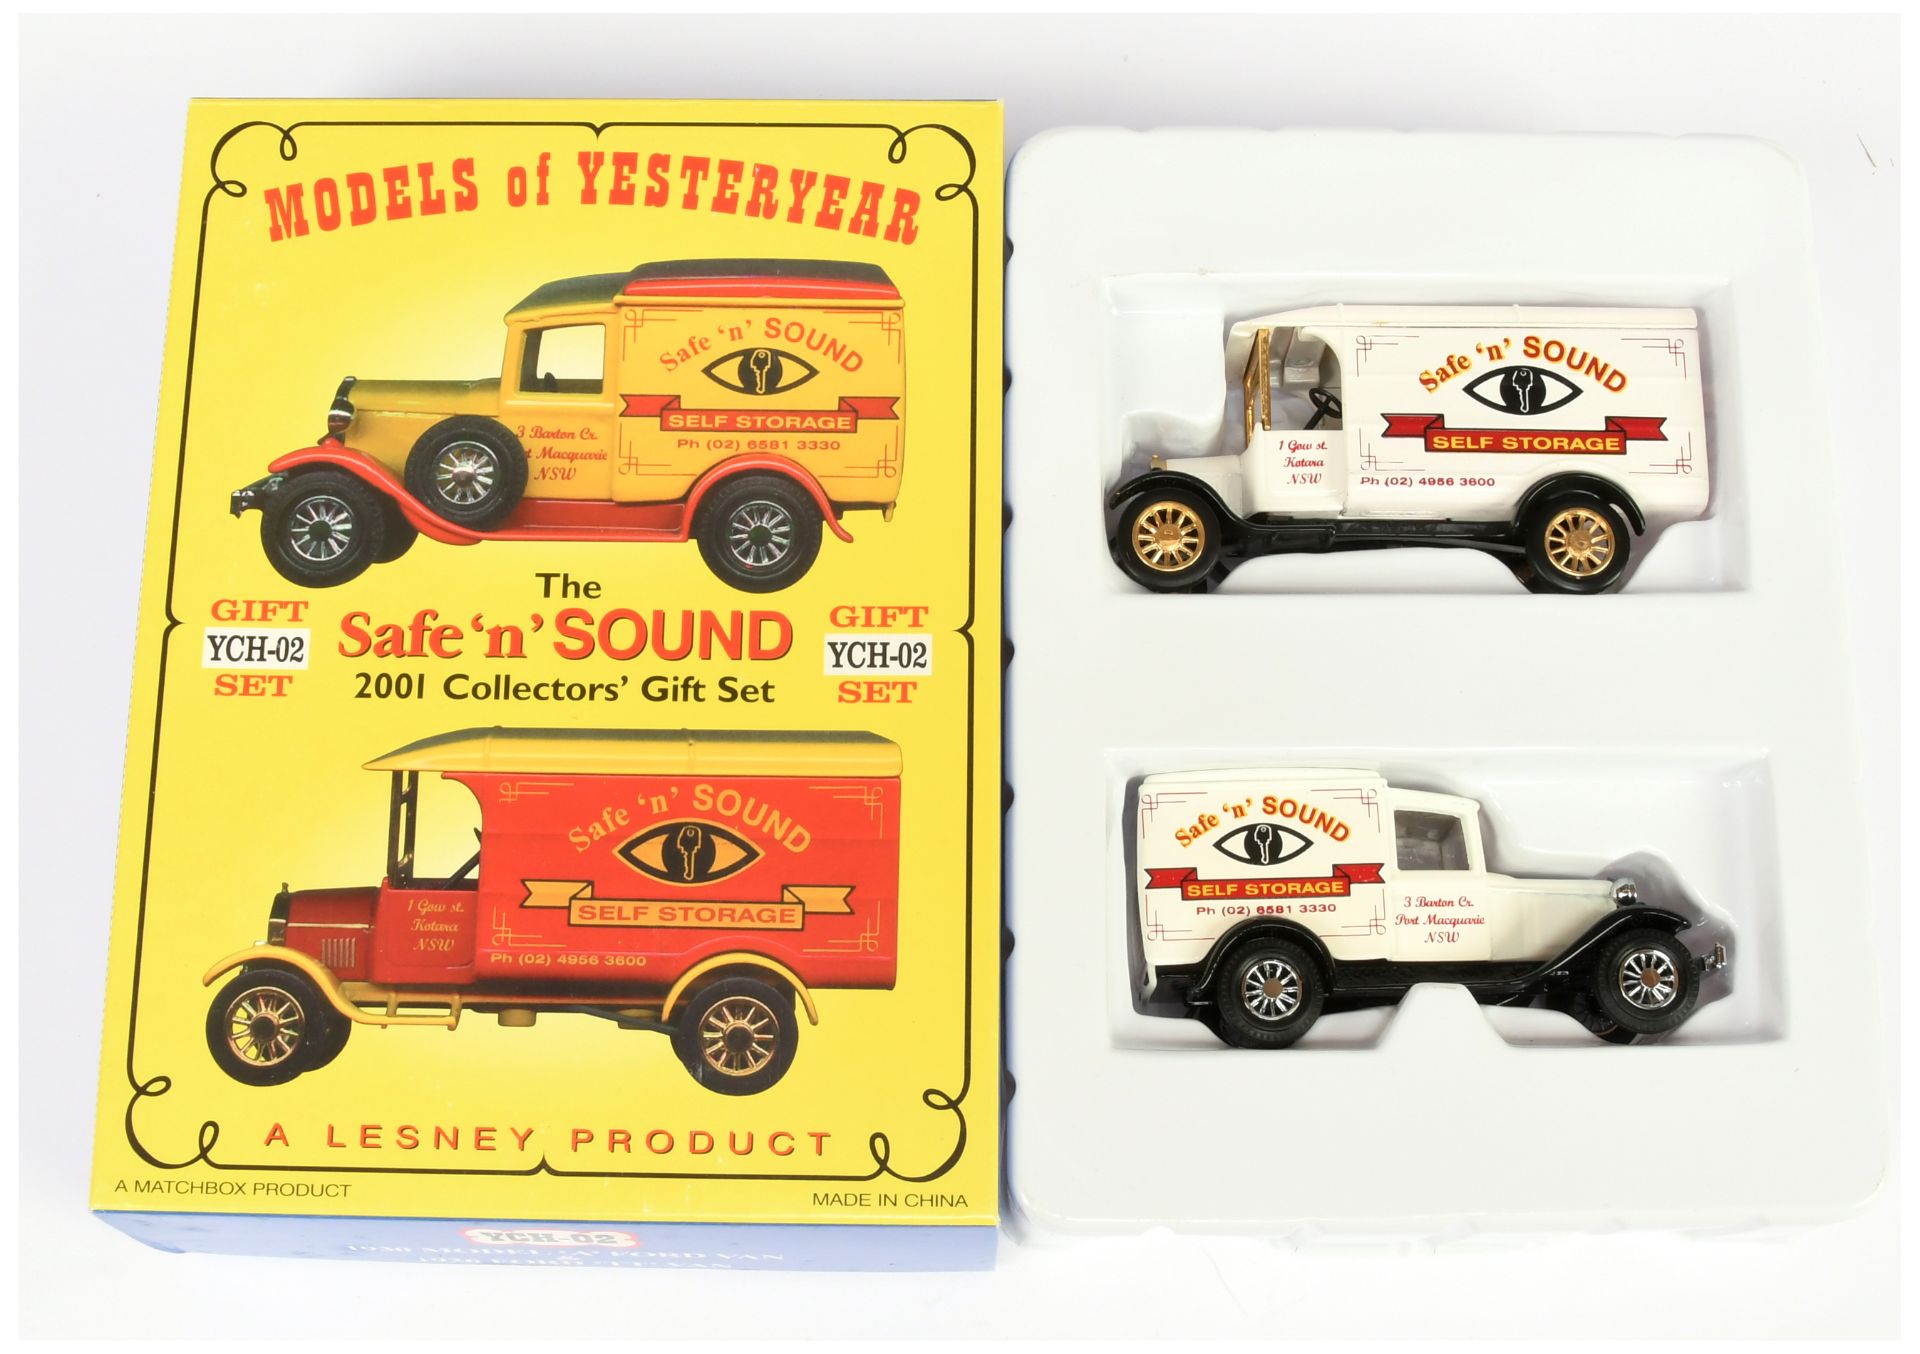 Matchbox Models of Yesteryear YCH02 (YSS01) The Safe 'n' Sound 2001 Collectors Gift Set comprisin...